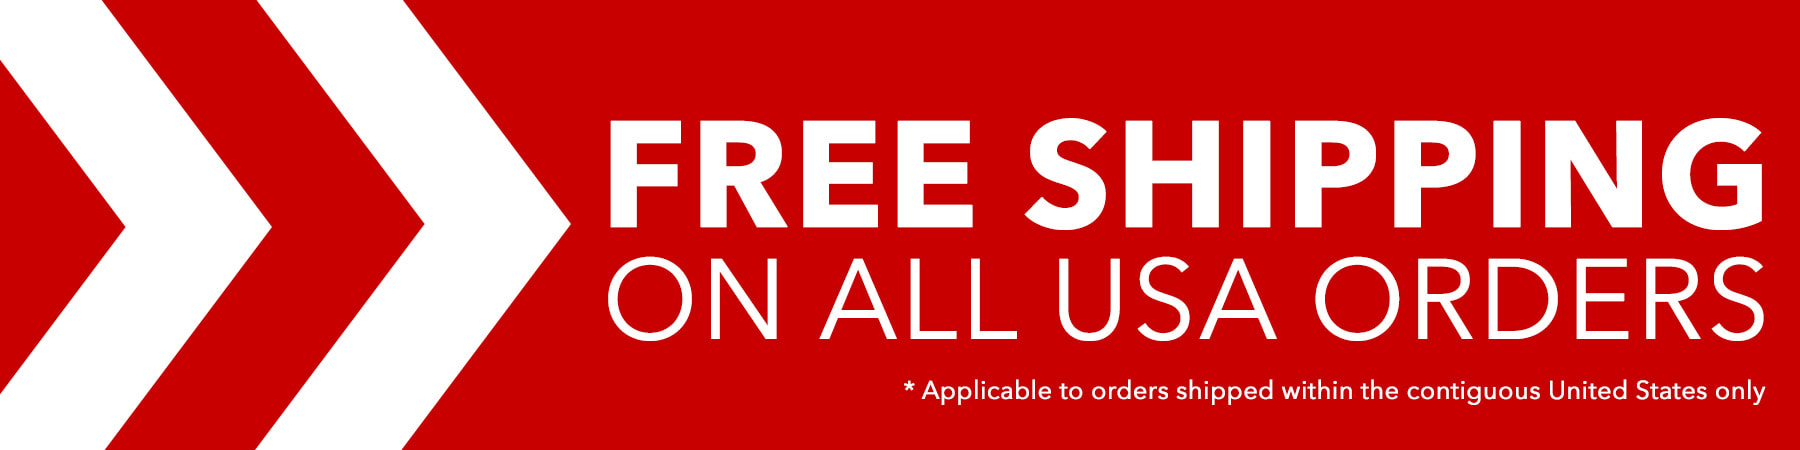 Free Shipping on All USA Orders! Applicable to orders shipped within the contiguous United States only. 